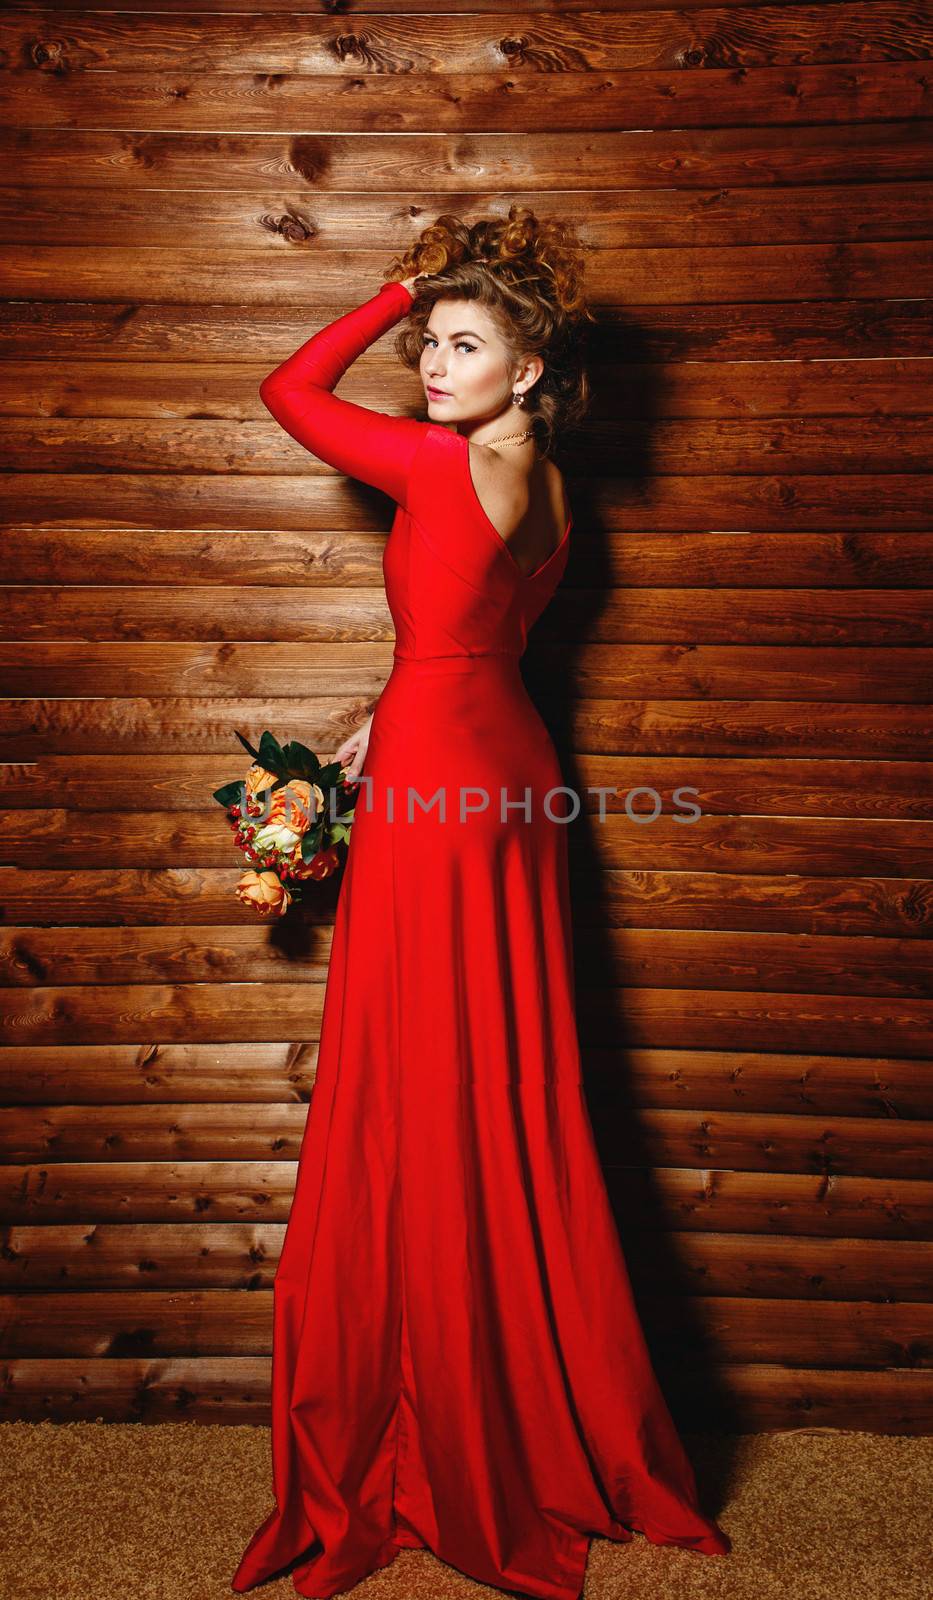 Lovely young girl in red dress holding bouquet of flowers